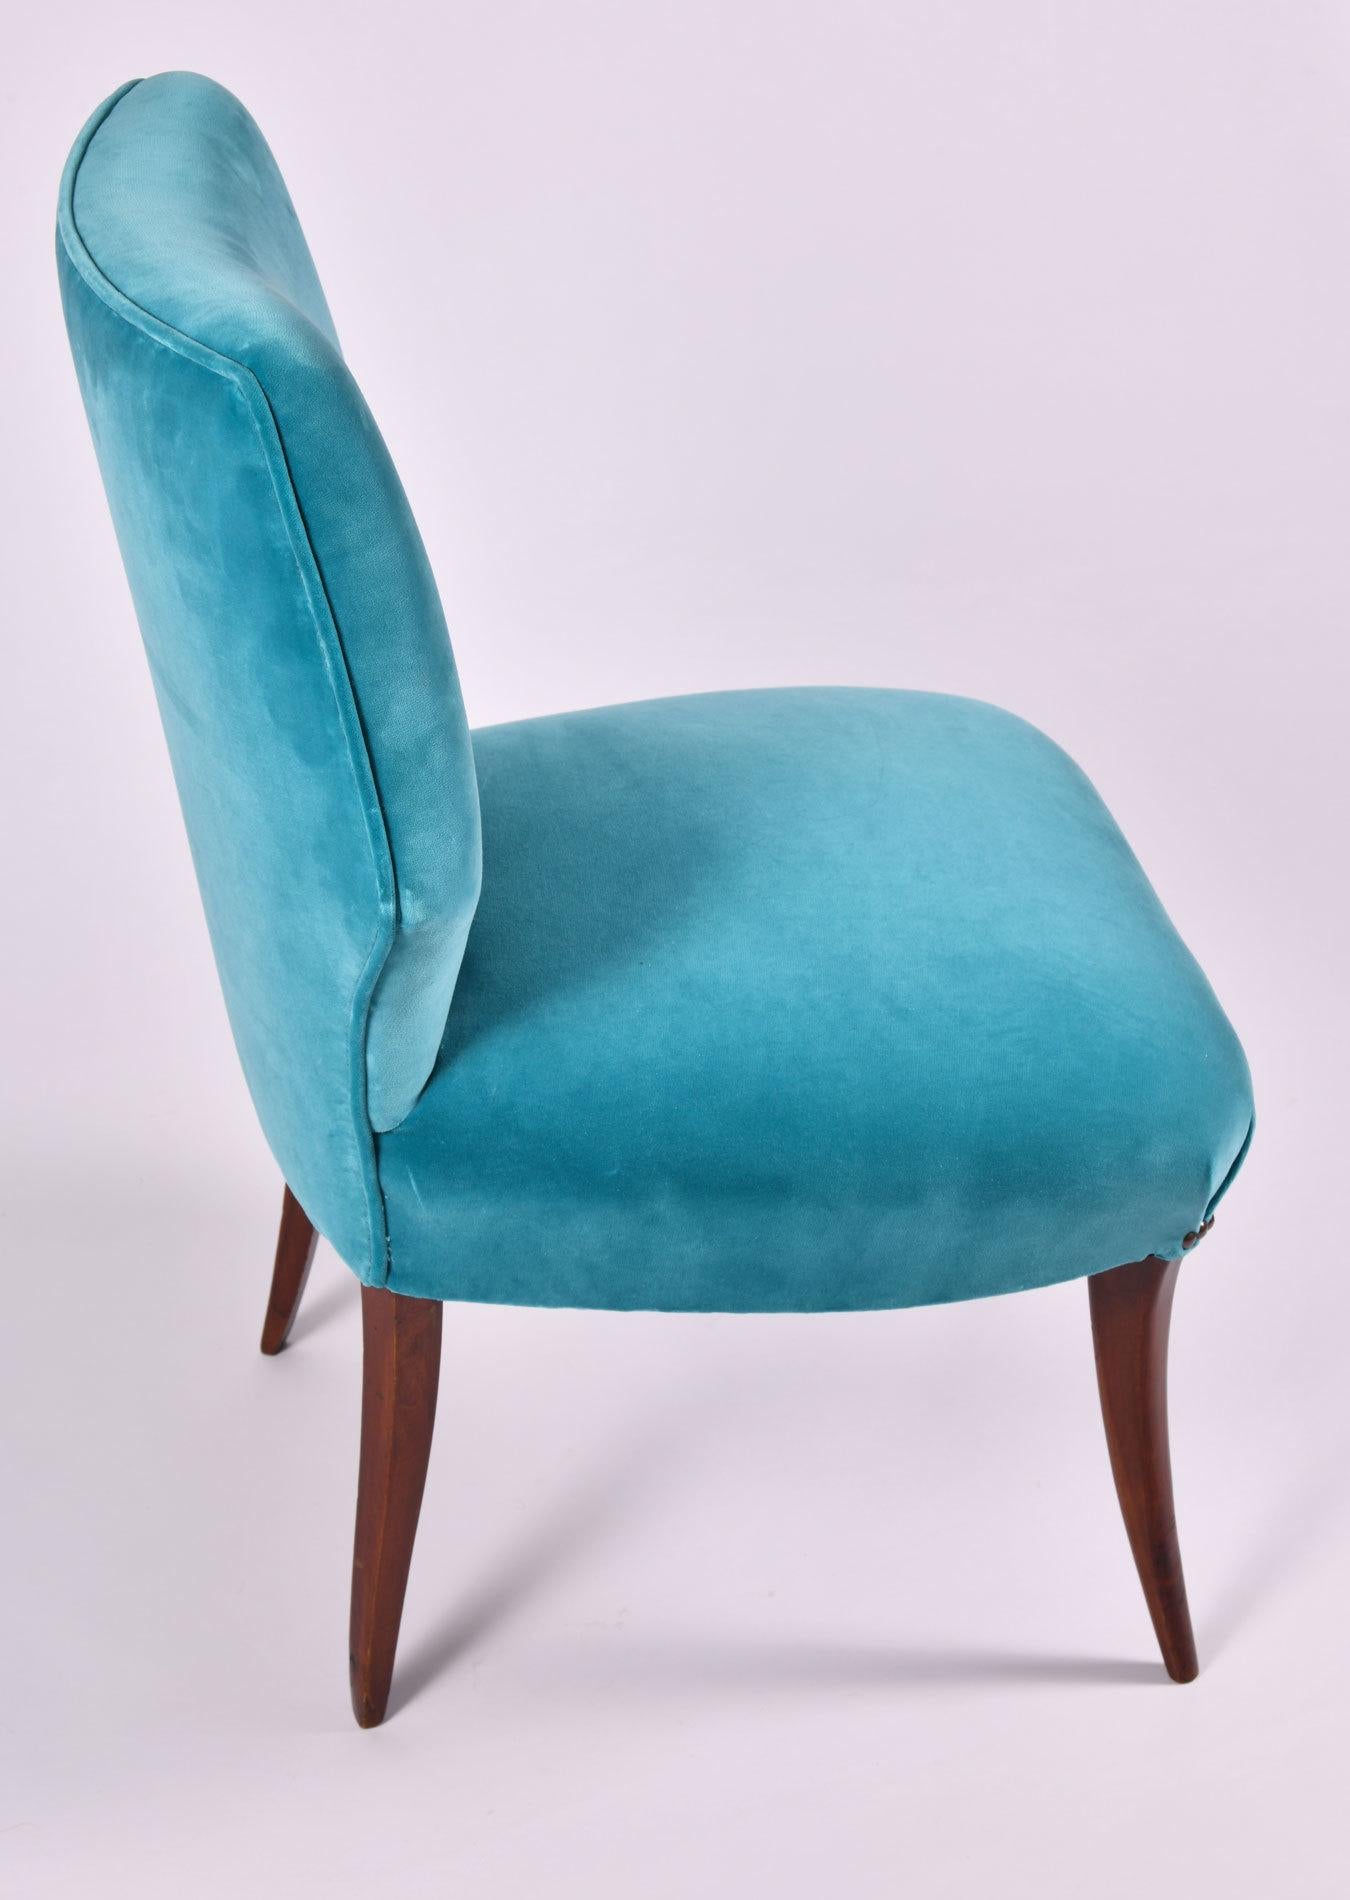 Mid-20th Century Pair of 1950s Italian Turquoise Occasional Chairs